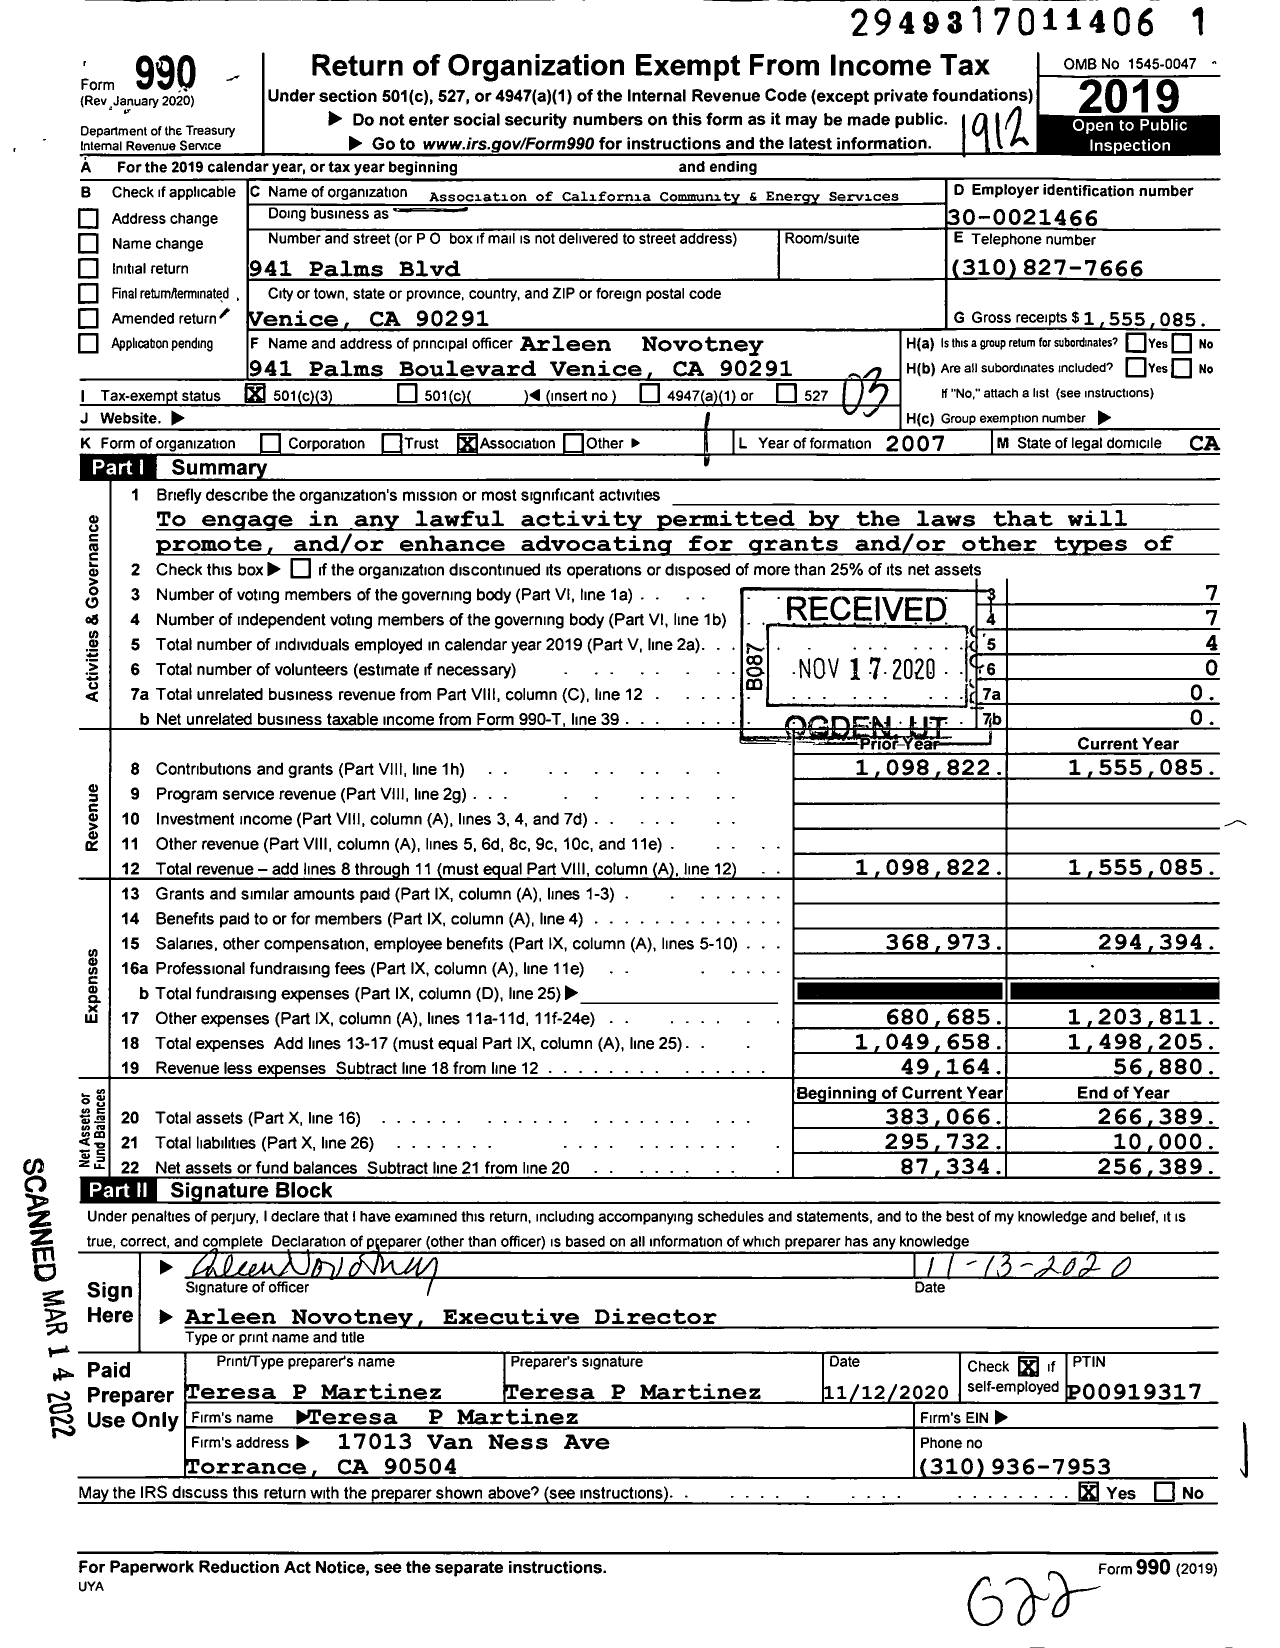 Image of first page of 2019 Form 990 for Association of California Community and Energy Services (ACCES)